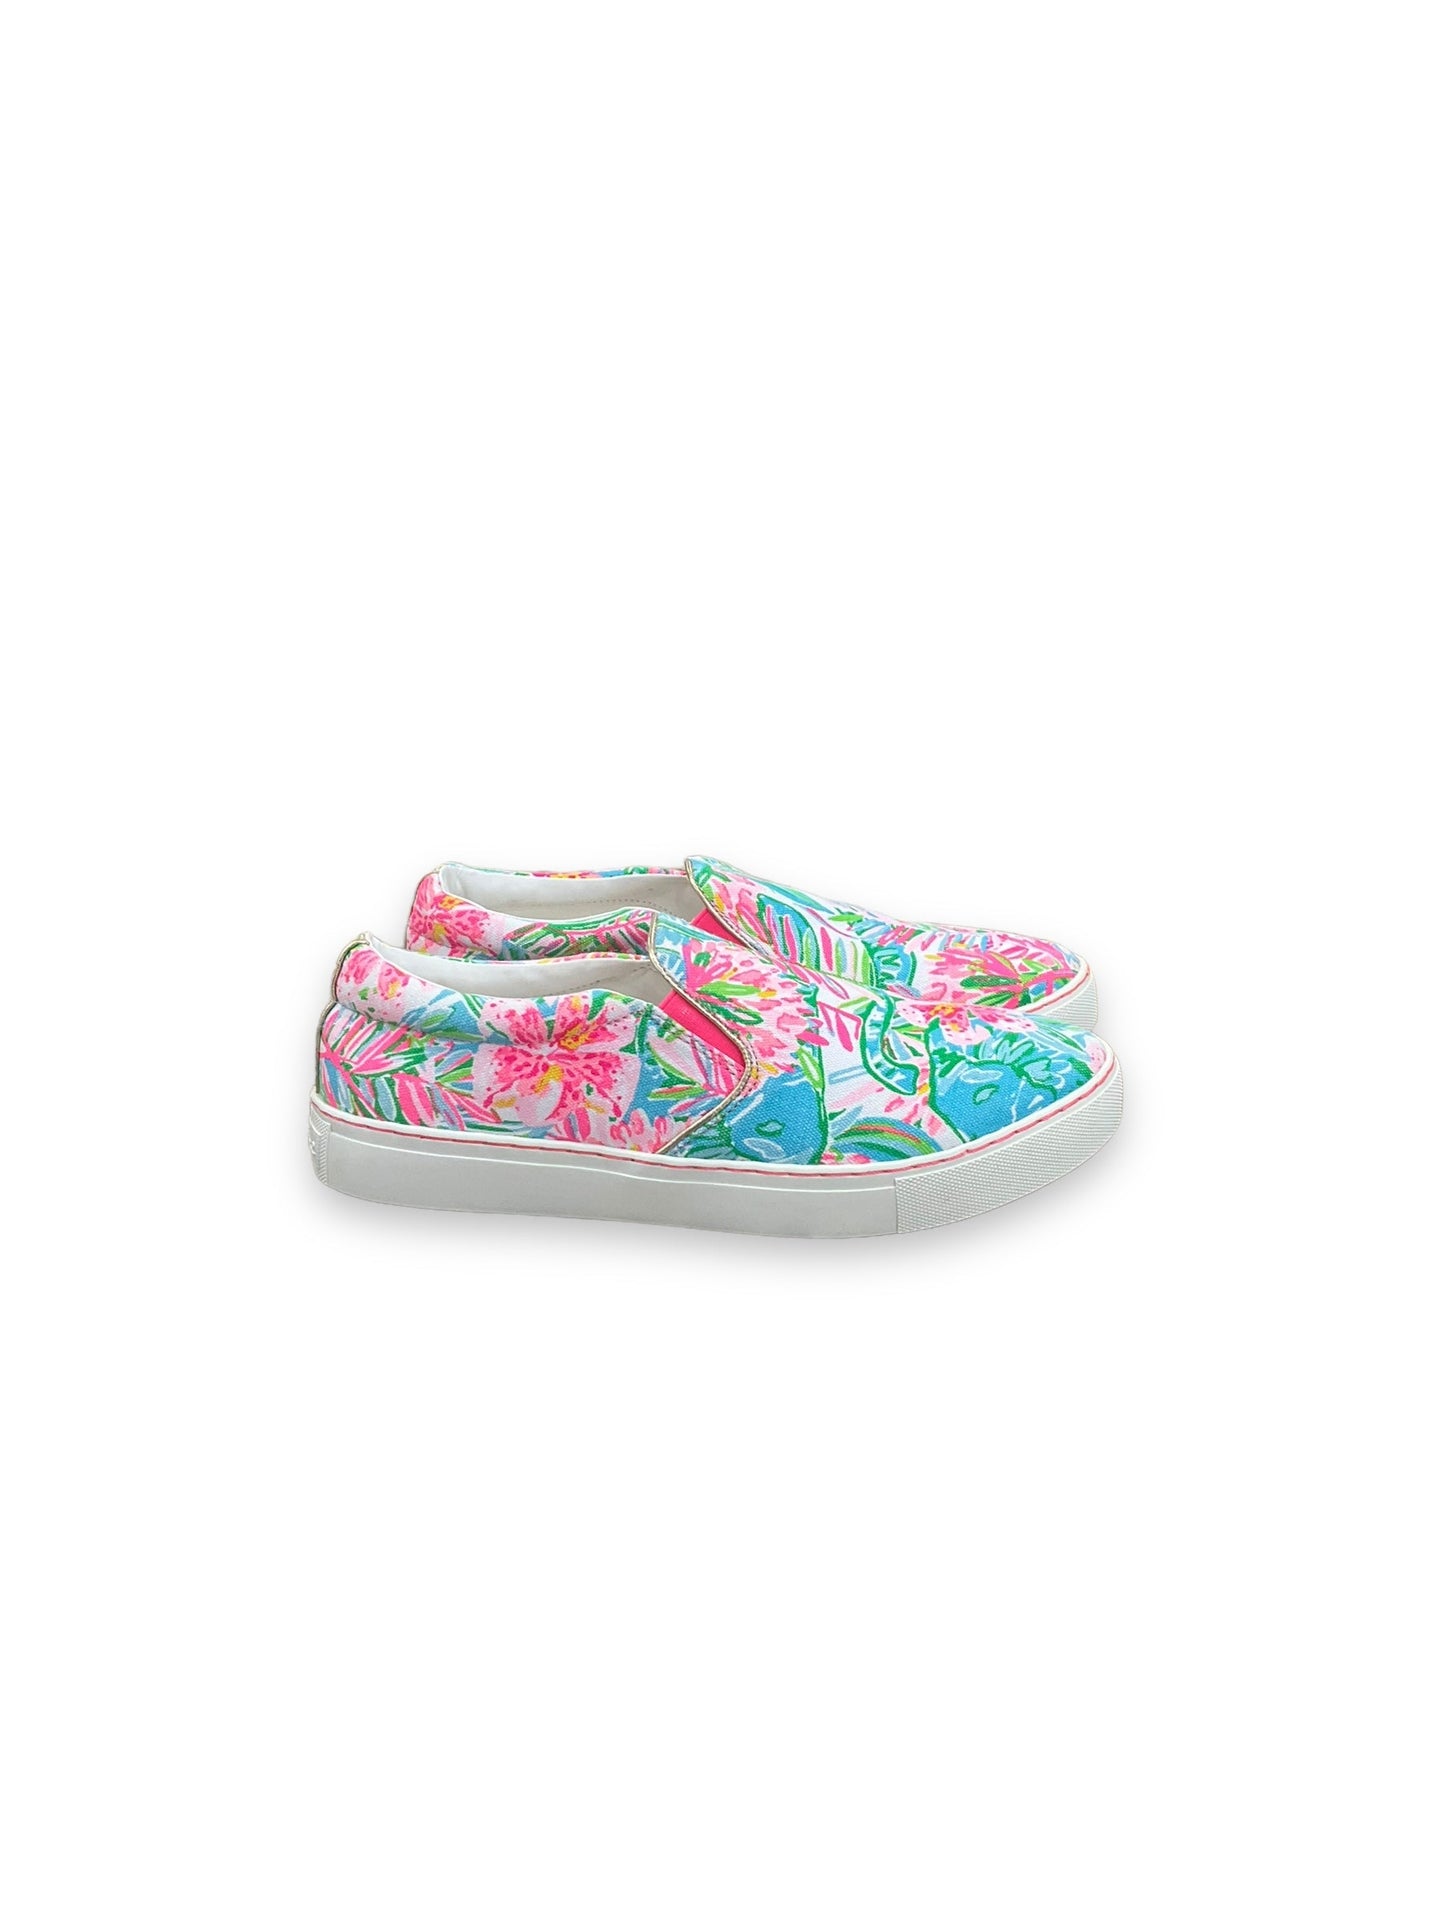 Multi-colored Shoes Flats Lilly Pulitzer, Size 10